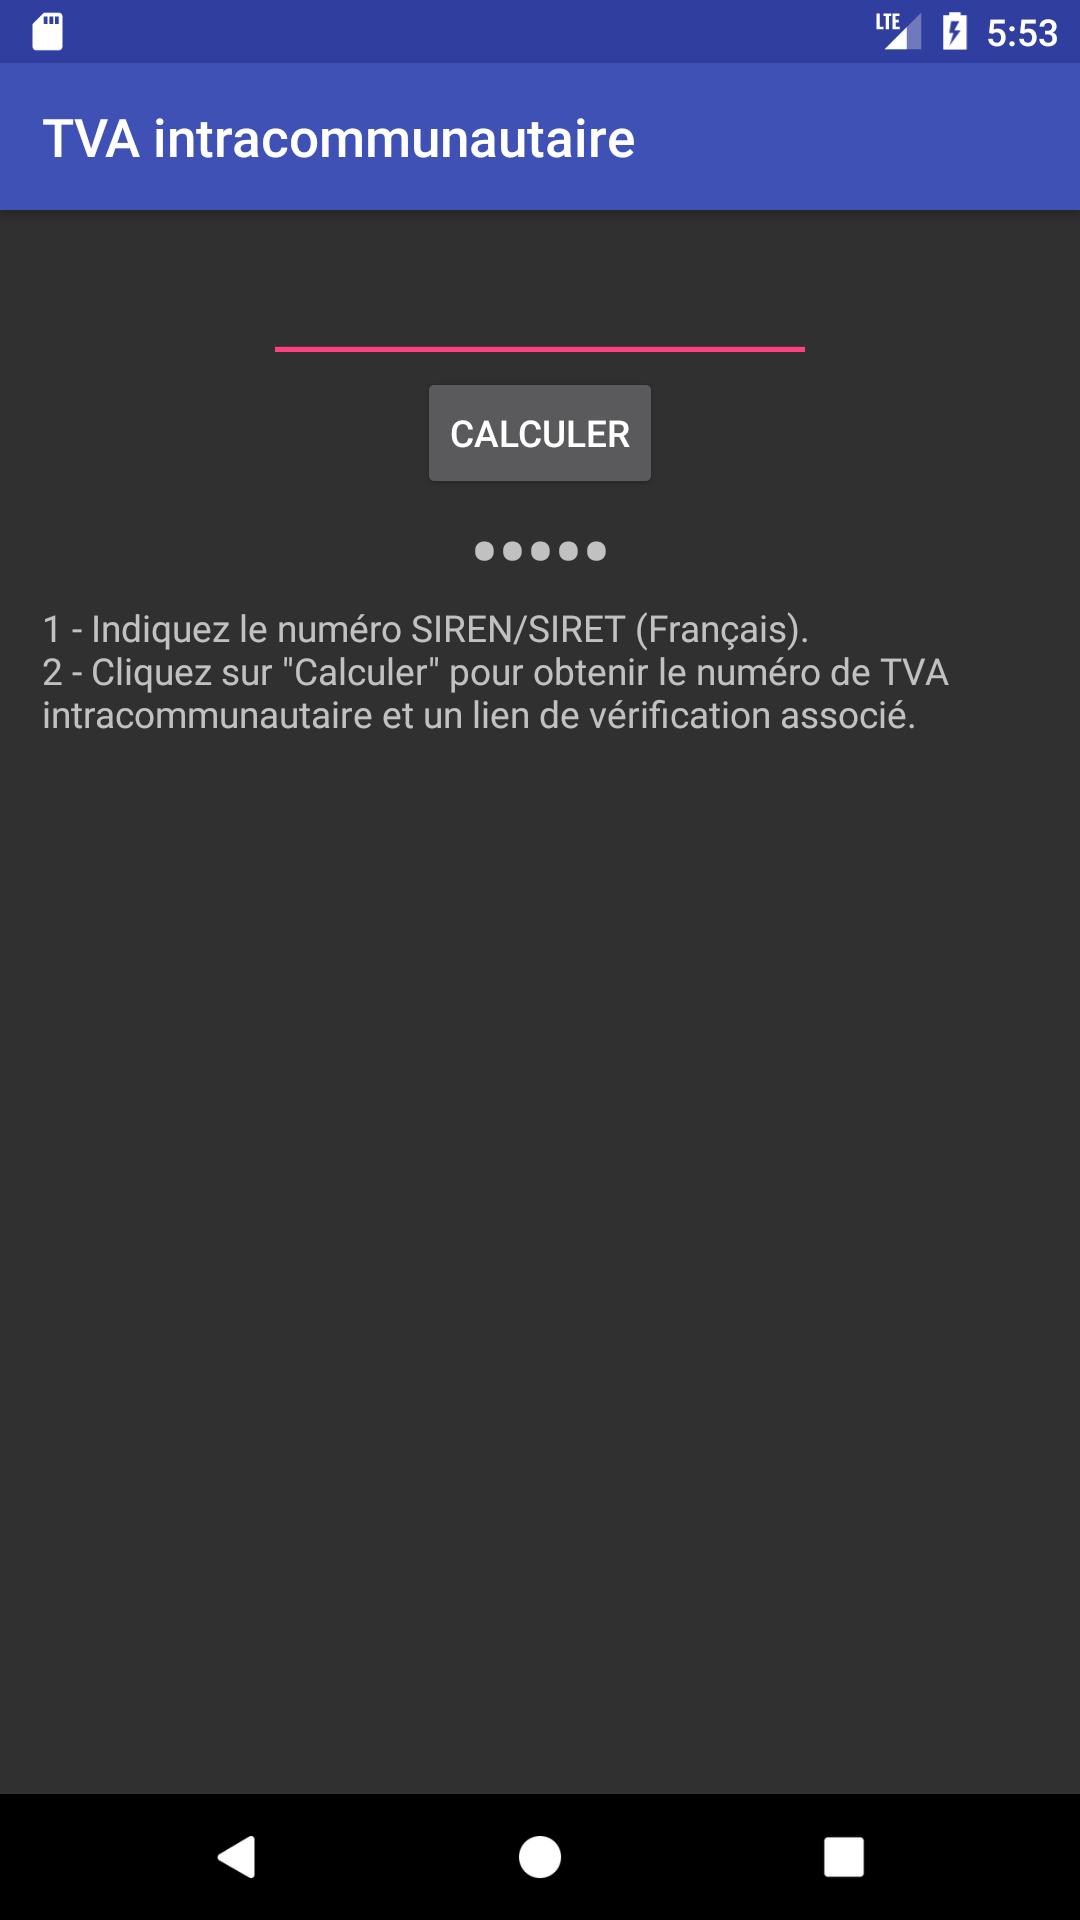 TVA Intracommunautaire for Android - APK Download